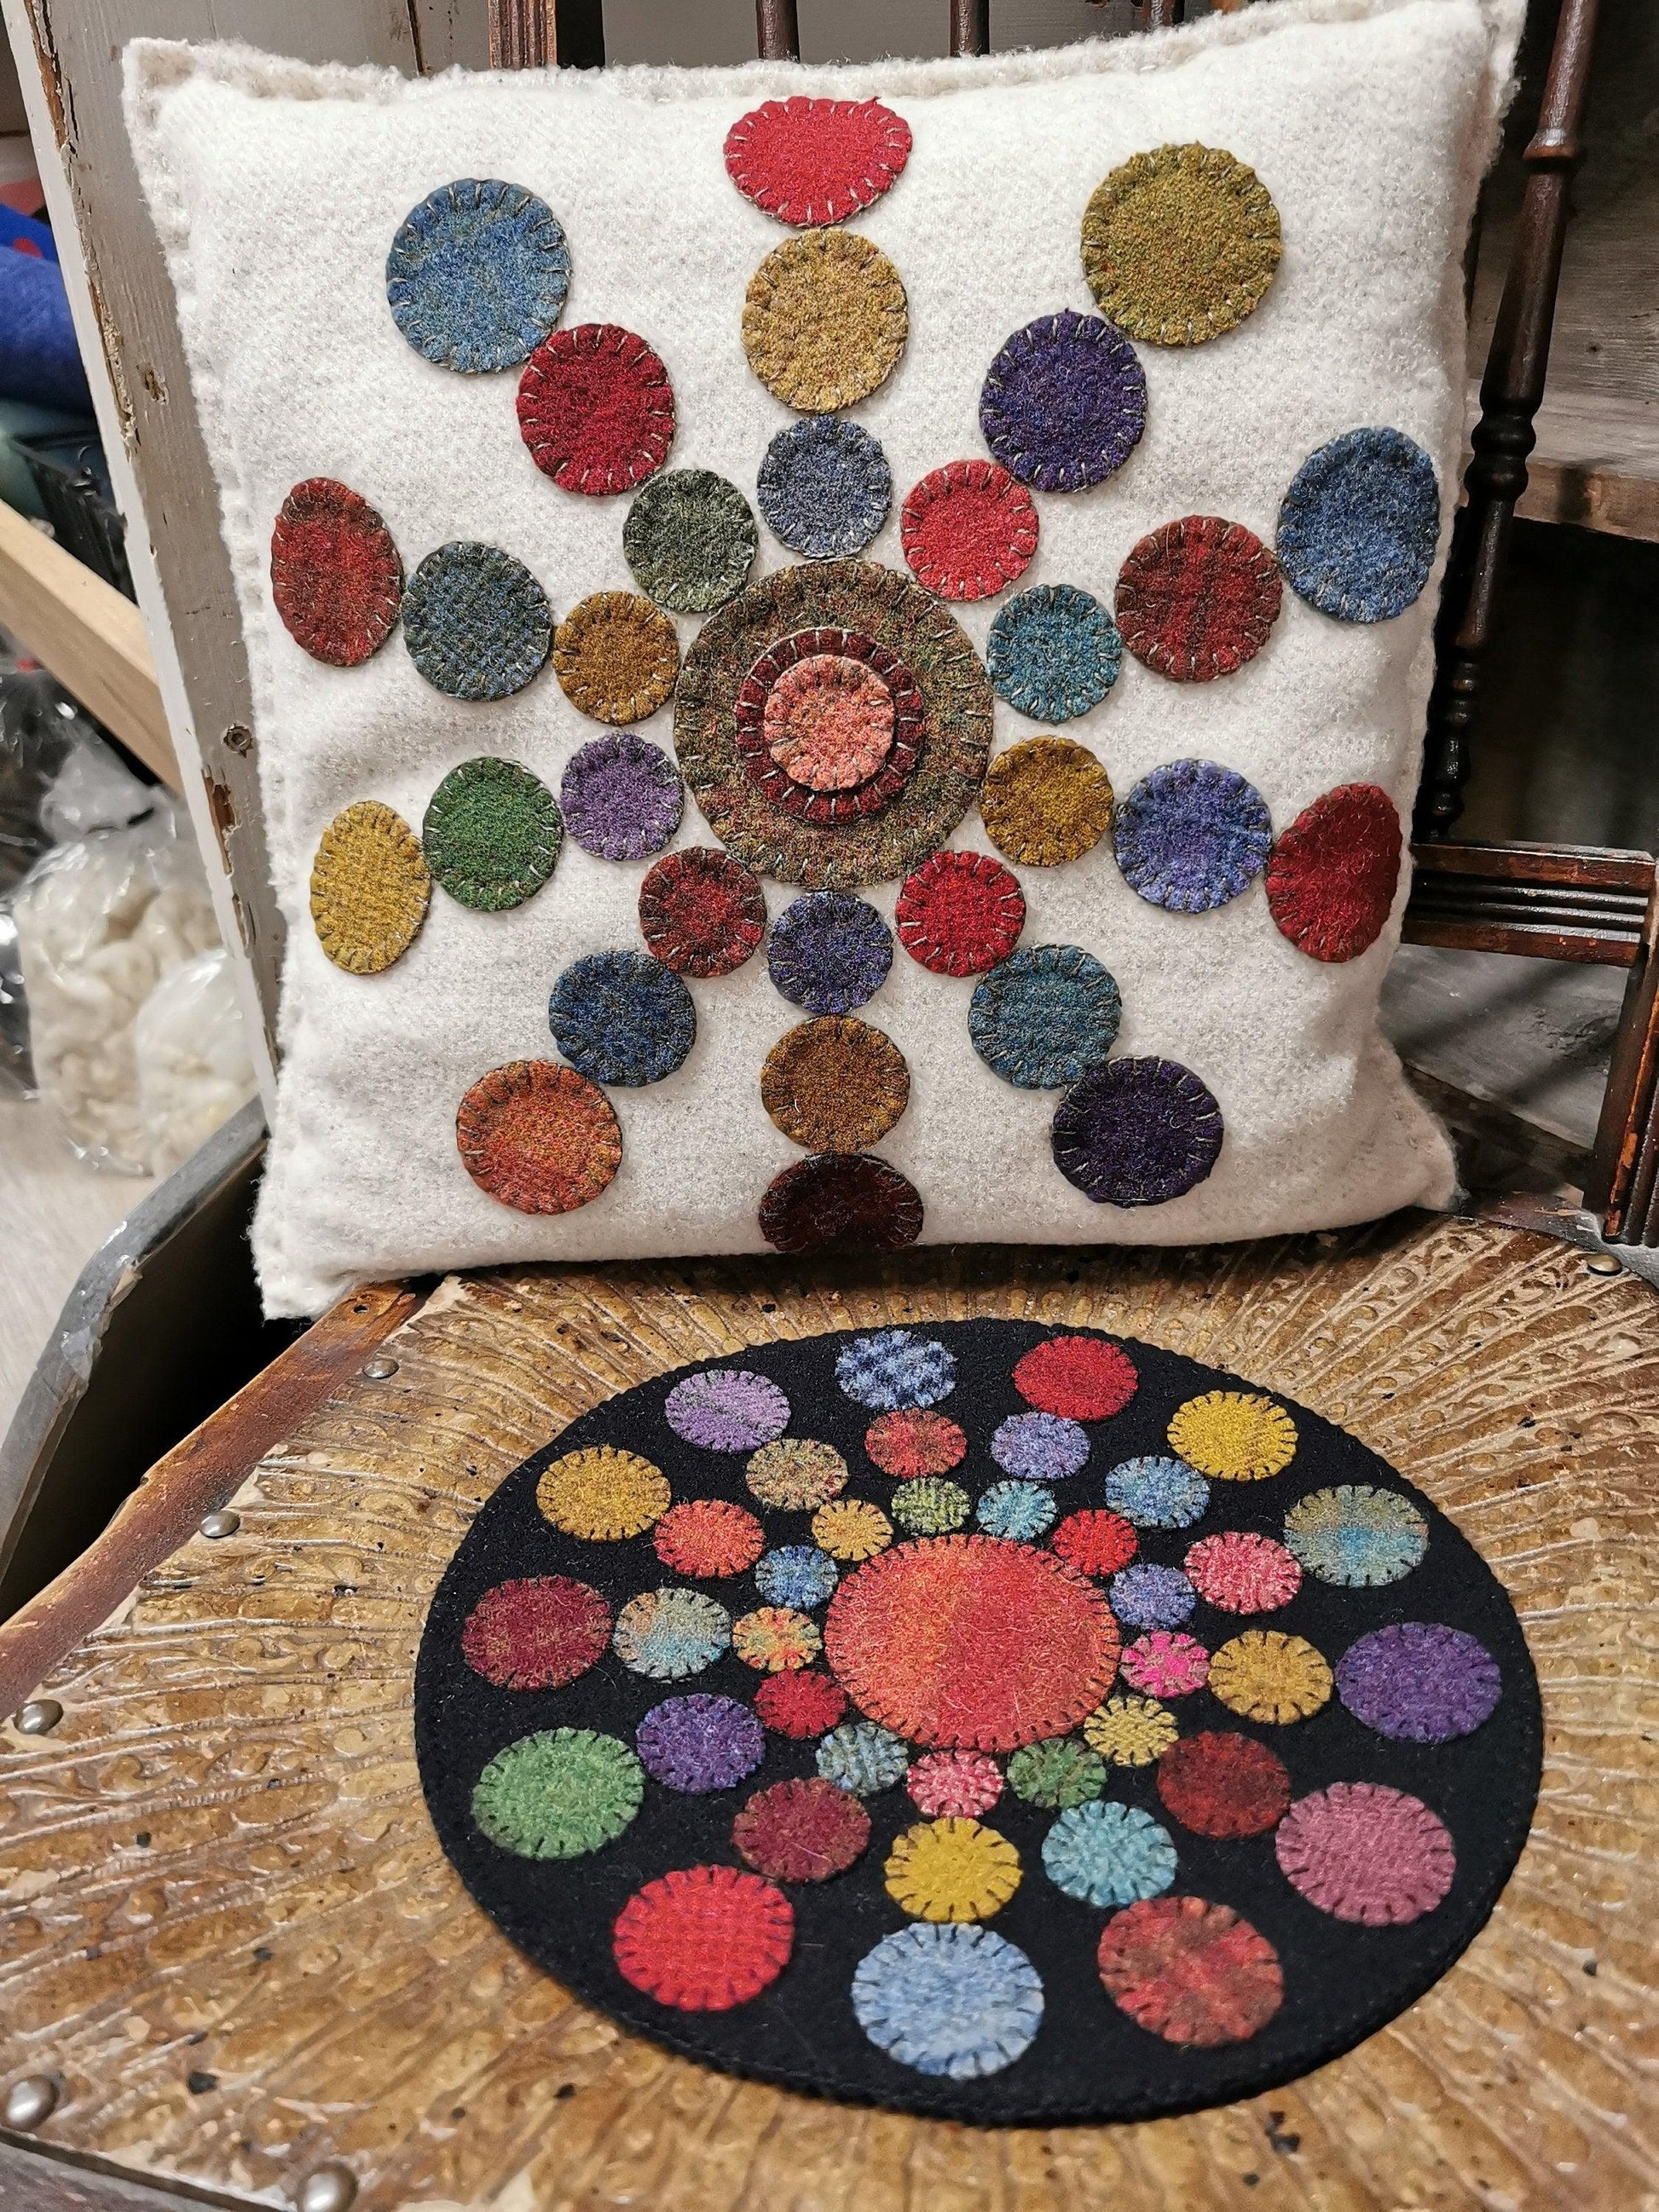 PENNY BURSTS PILLOW Kit - All About Ewe Wool Shop